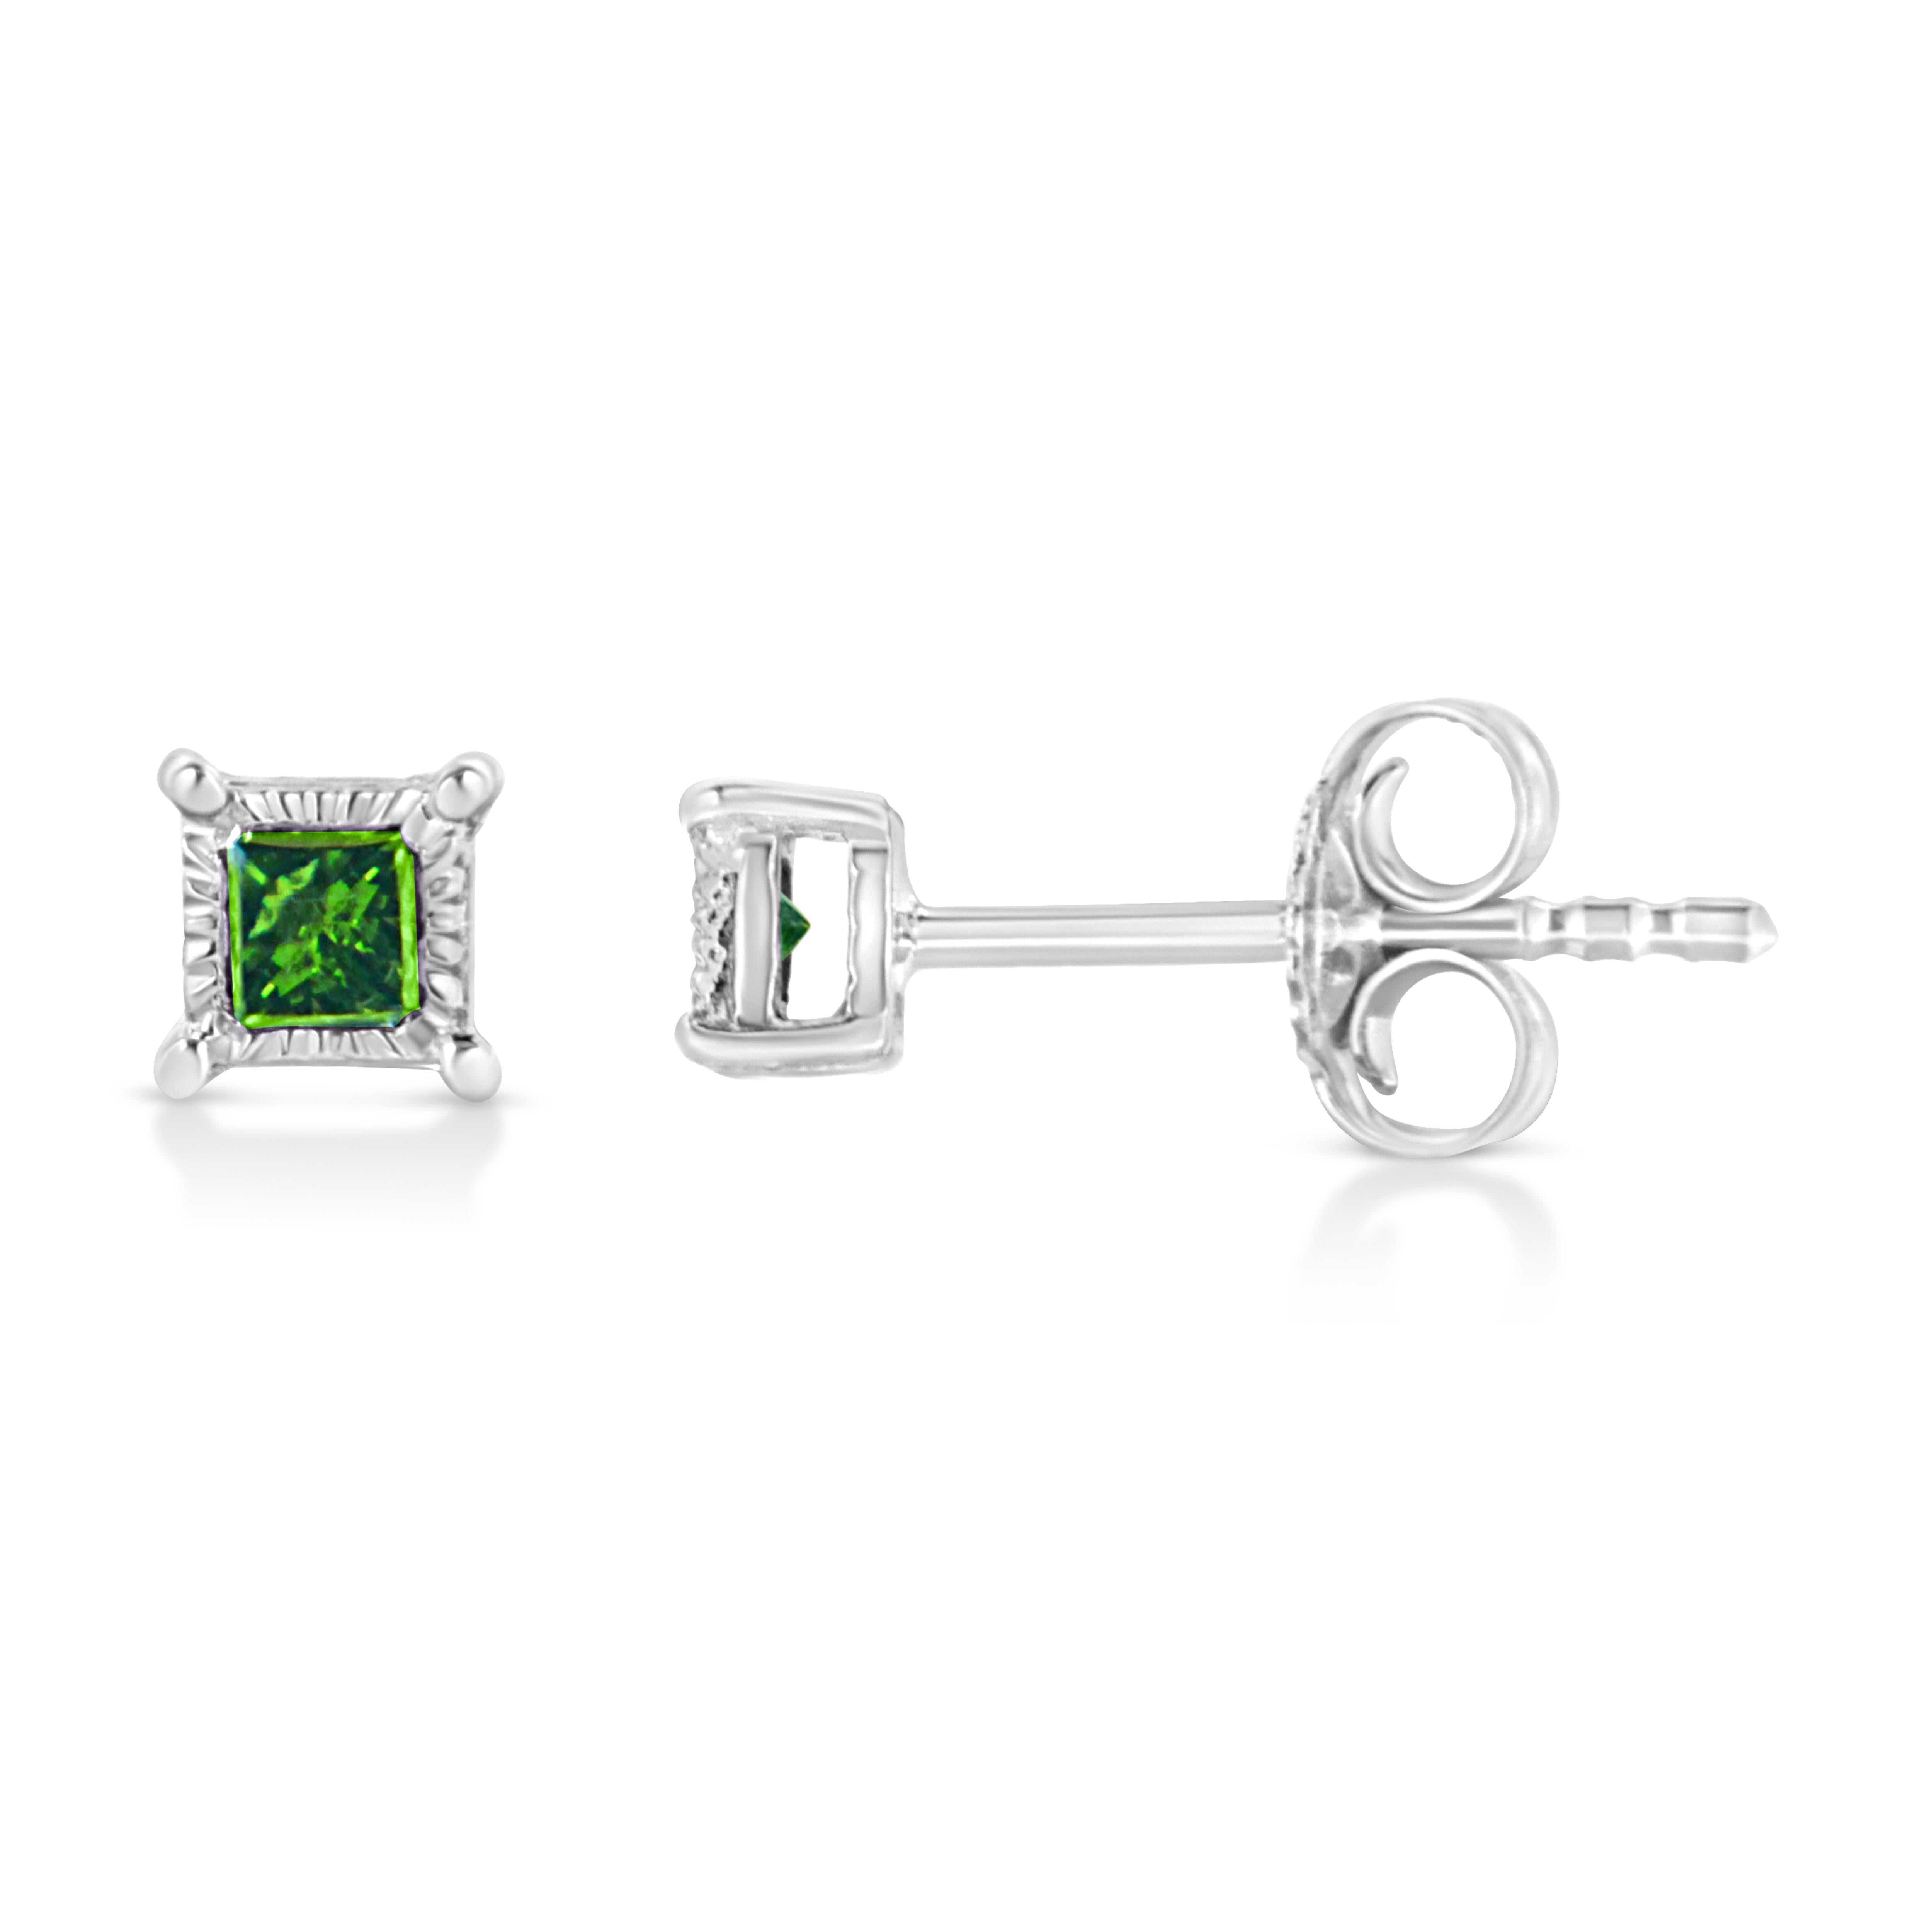 Simple is beautiful, and this pair of earrings defines this statement elegantly. Fashioned in a square shape, the earrings are crafted of alluring sterling silver. Secured with pushback mechanism, these earrings are gilded with green-hued princess